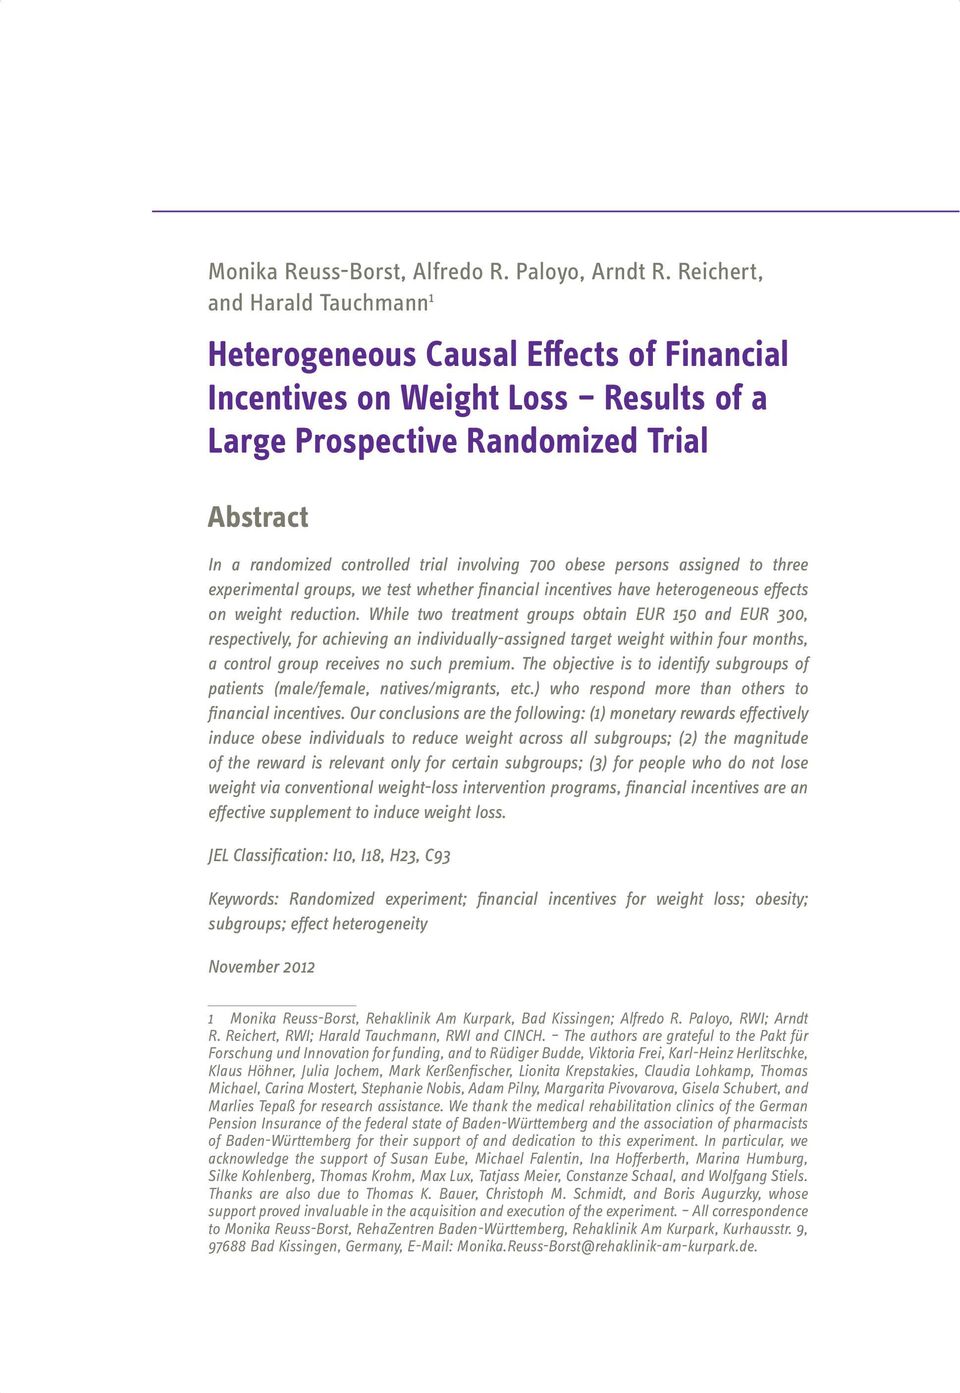 involving 700 obese persons assigned to three experimental groups, we test whether financial incentives have heterogeneous effects on weight reduction.